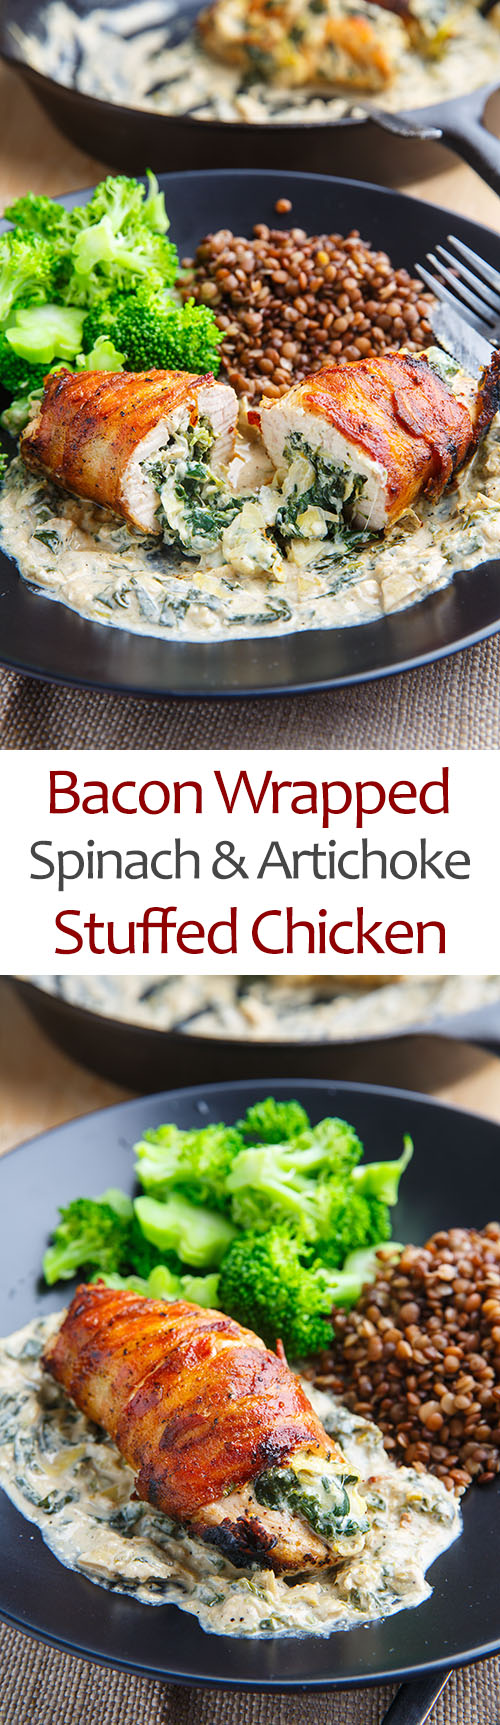 Bacon Wrapped Spinach and Artichoke Stuffed Chicken